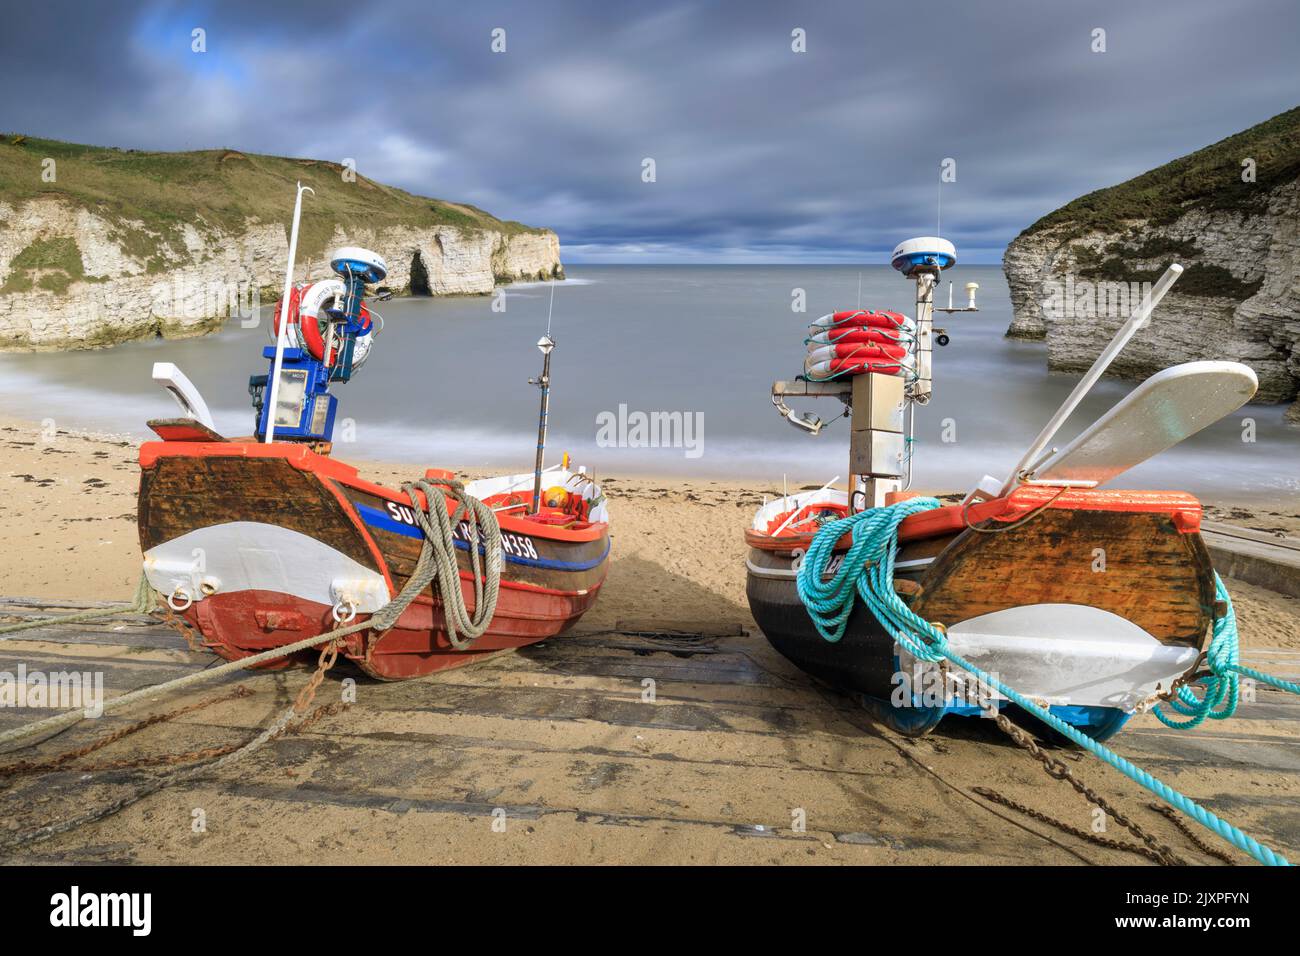 Boats at North Landing near Flamborough in Yorkshire captured using a long shutter speed. Stock Photo